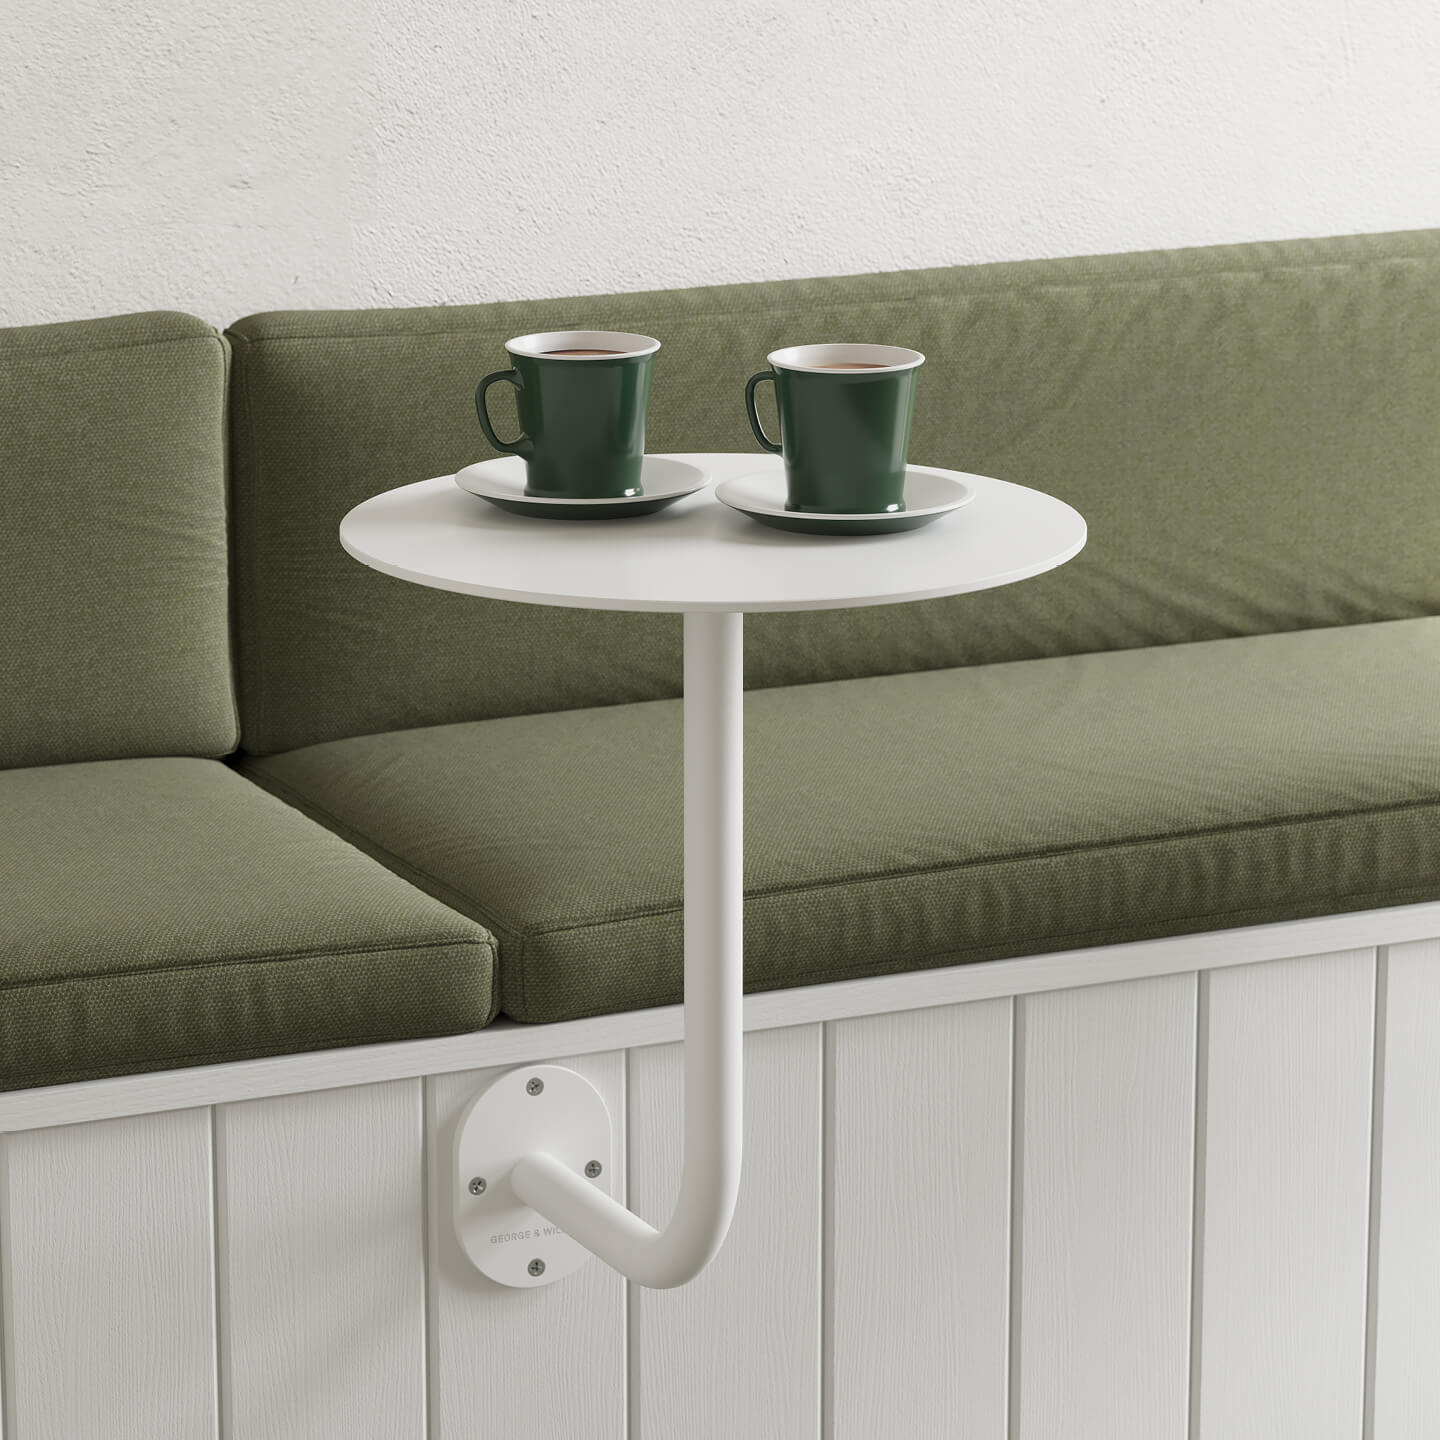 wall mounted cafe table, Bistro Table, Cafe table, End Tables, Small Table